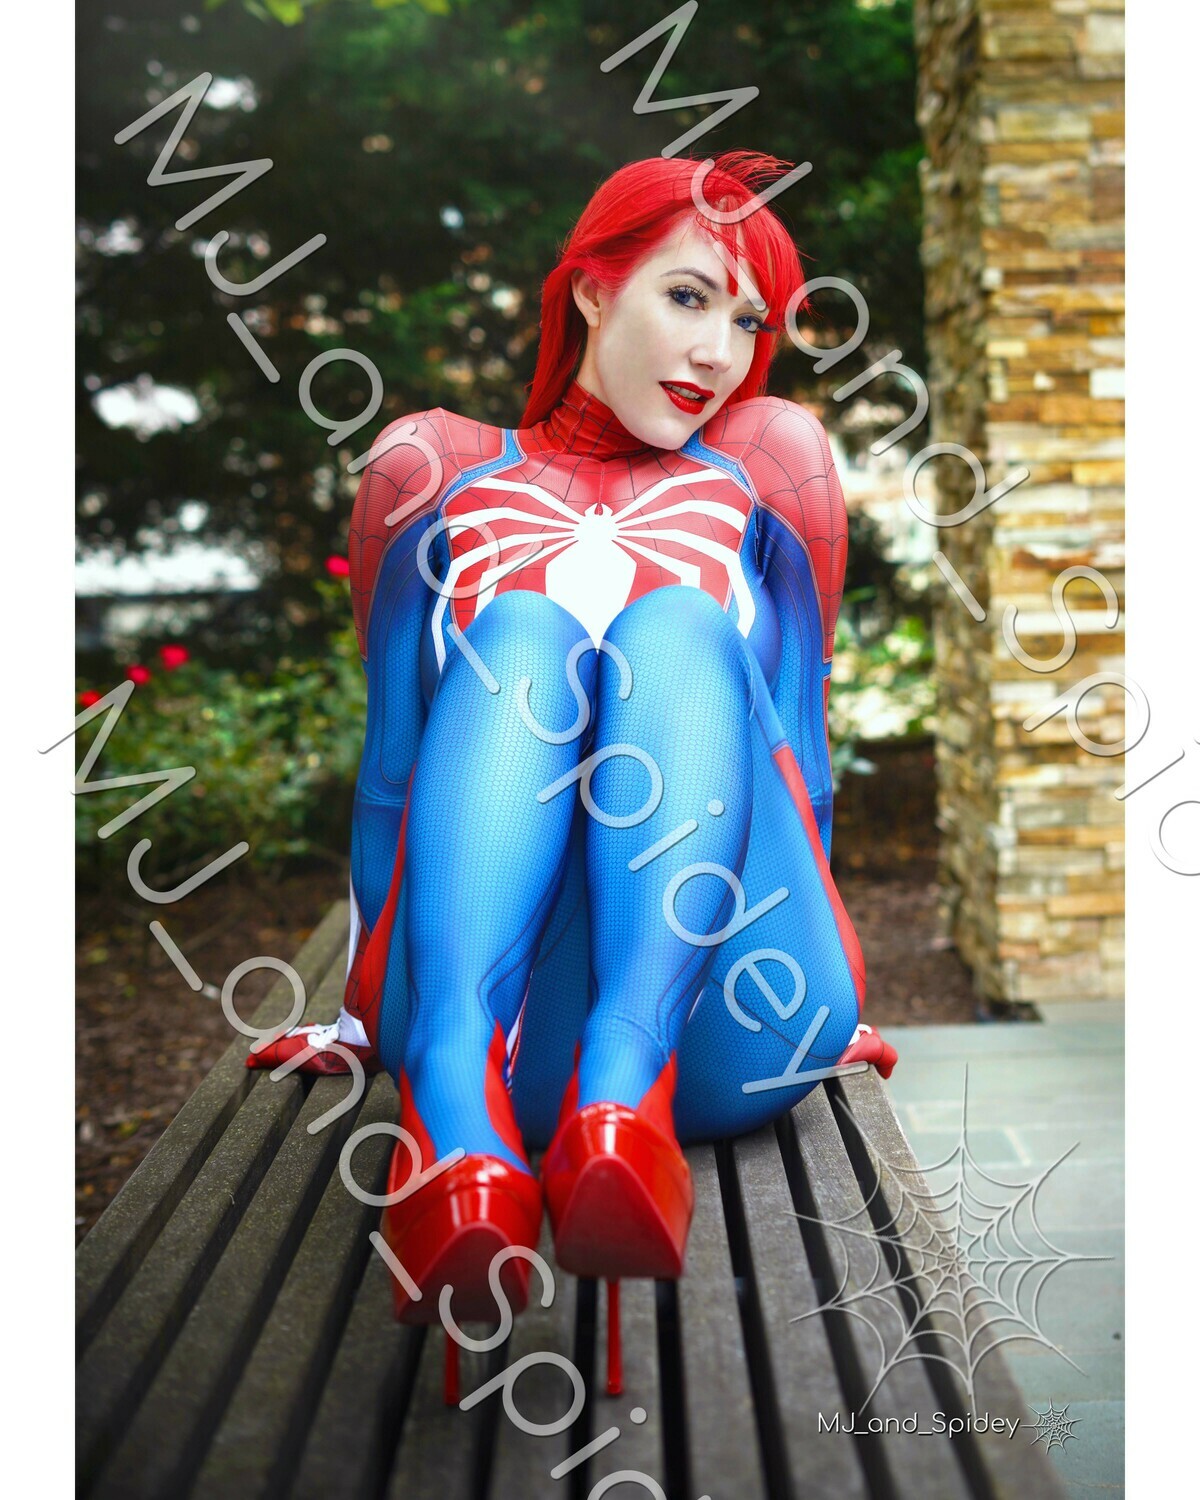 Marvel - Spider-Man - Mary Jane Watson - PS4 Insomniac Spider-Suit 3 - Digital Cosplay Image (@MJ_and_Spidey, MJ and Spidey, Comics)